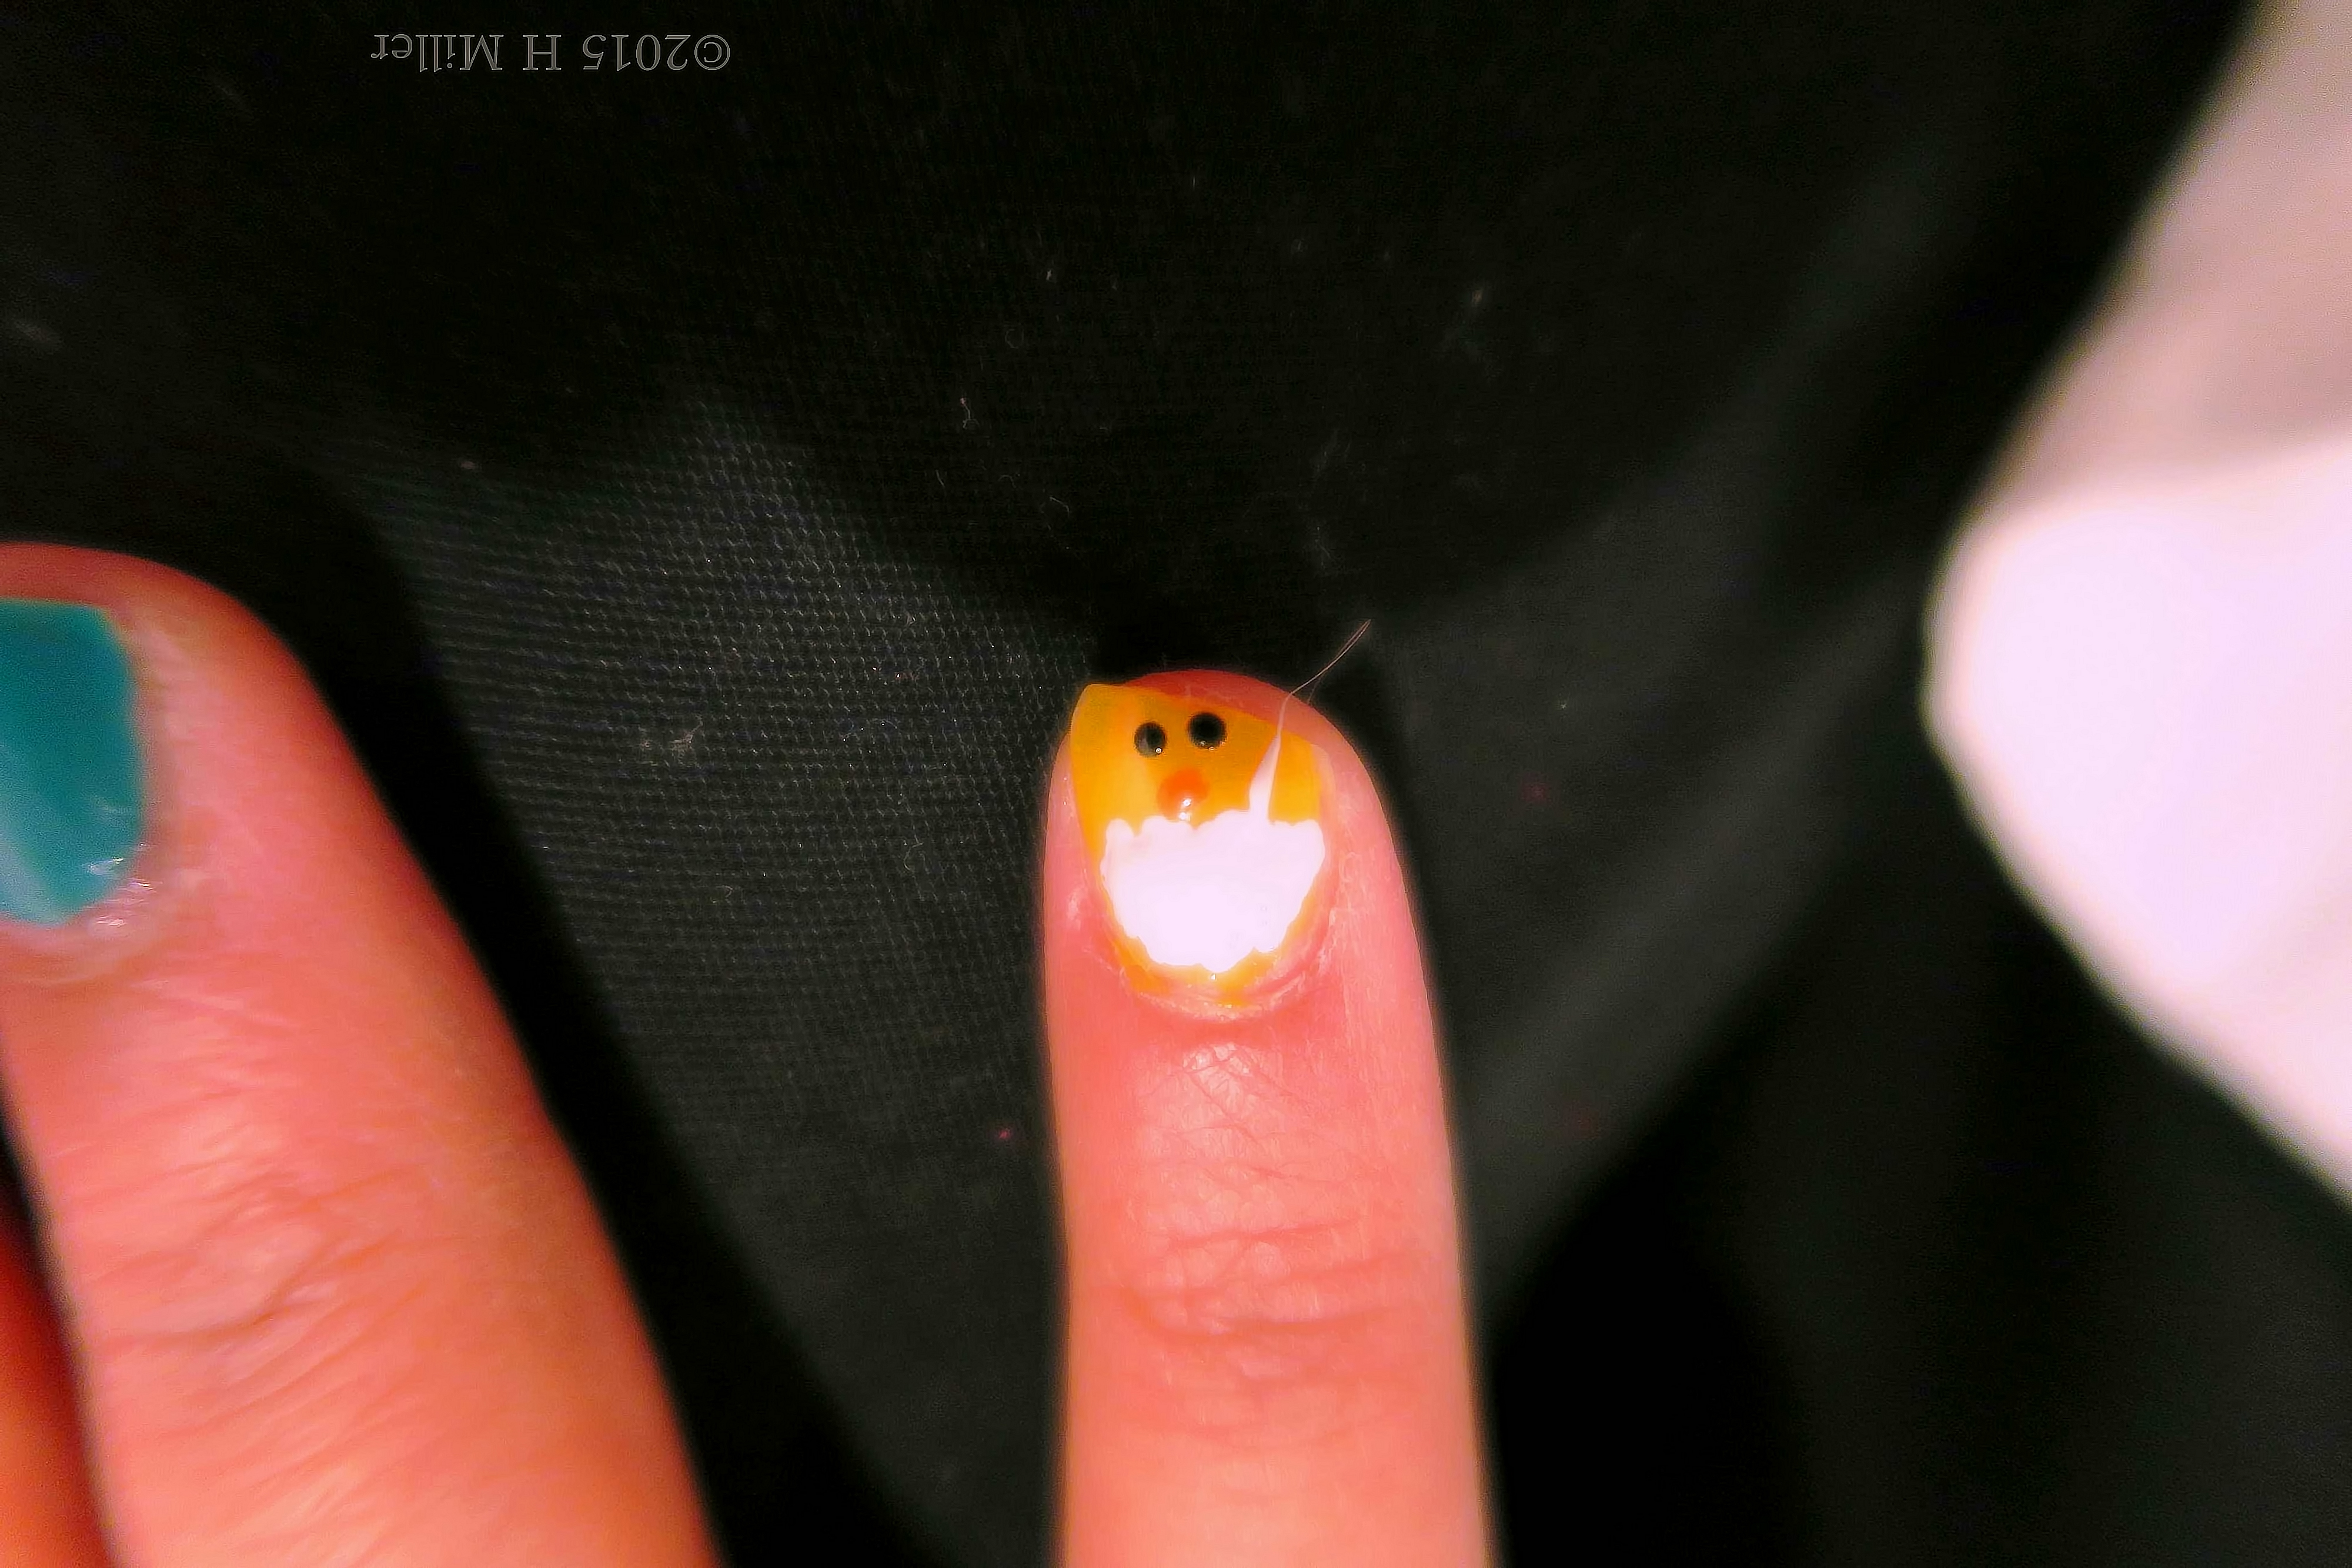 She Has A Baby Chick On Her Nail! 